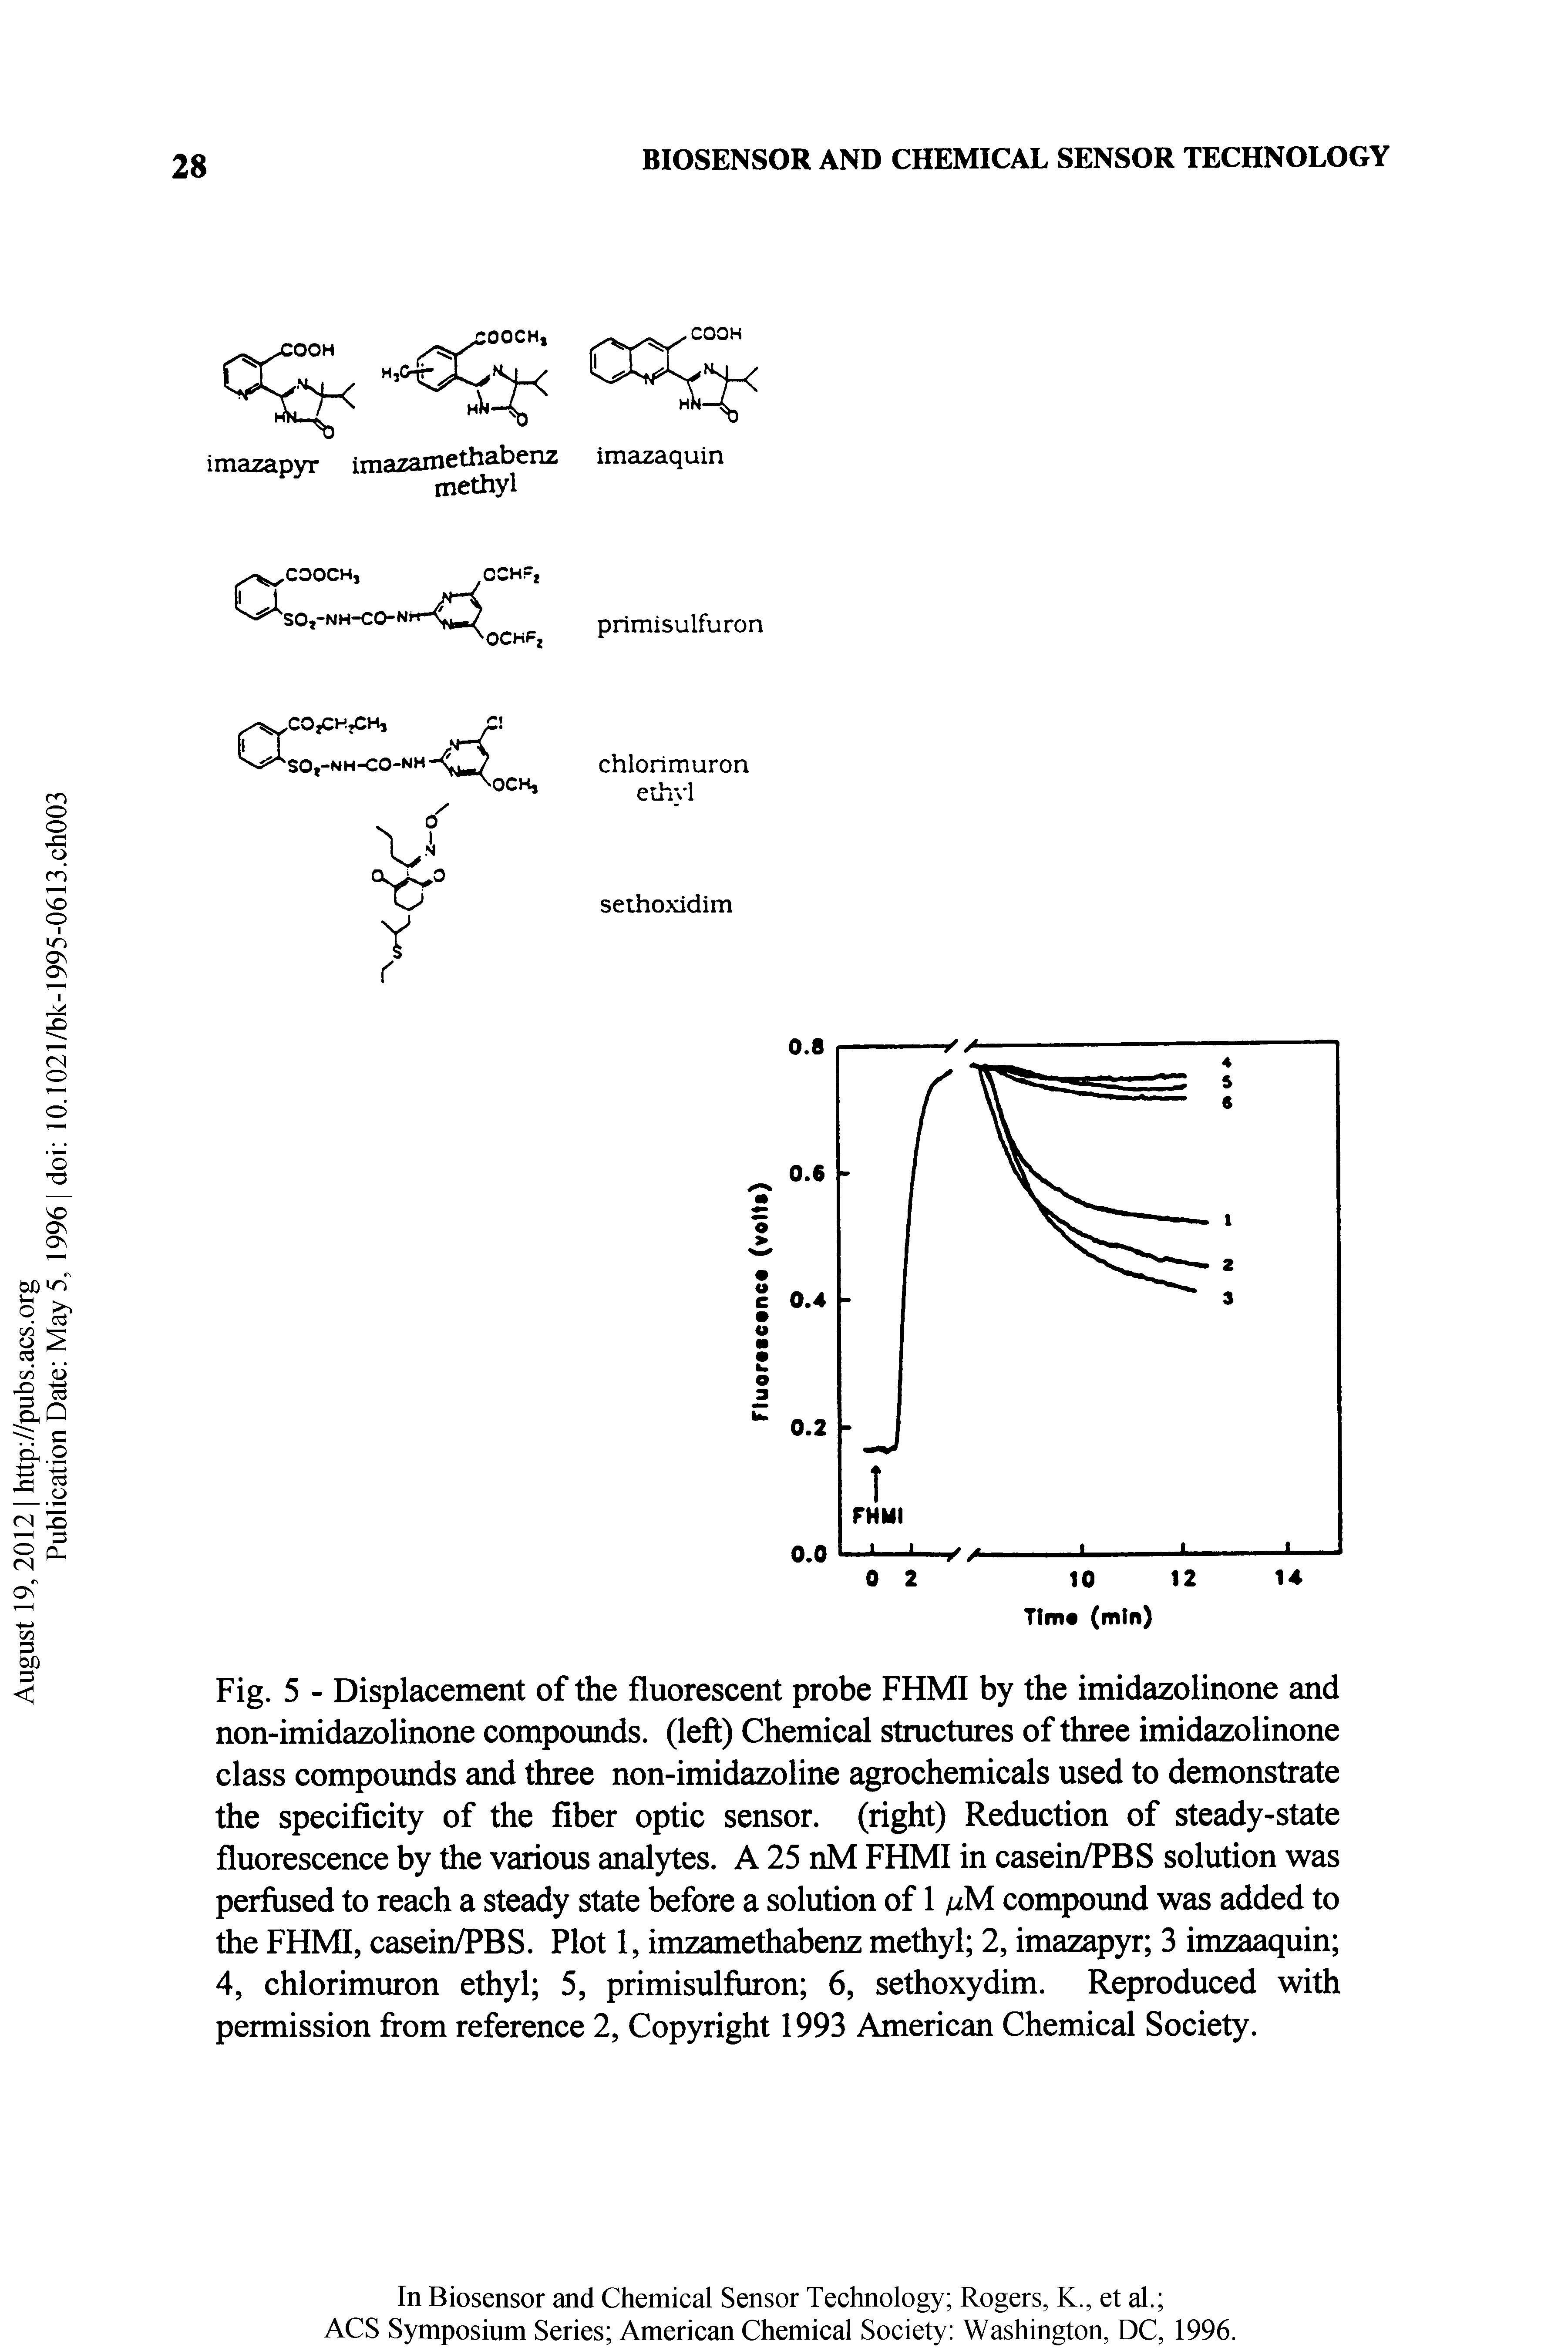 Fig. 5 - Displacement of the fluorescent probe FHMI by the imidazolinone and non-imidazolinone compounds, (left) Chemical structures of three imidazolinone class compounds and three non-imidazoline agrochemicals used to demonstrate the specificity of the fiber optic sensor, (right) Reduction of steady-state fluorescence by the various analytes. A 25 nM FHMI in casein/PBS solution was perfused to reach a steady state before a solution of 1 jlM compound was added to the FHMI, casein/PBS. Plot 1, imzamethabenz methyl 2, imazapyr 3 imzaaquin 4, chlorimuron ethyl 5, primisulfuron 6, sethoxydim. Reproduced with permission from reference 2, Copyright 1993 American Chemical Society.